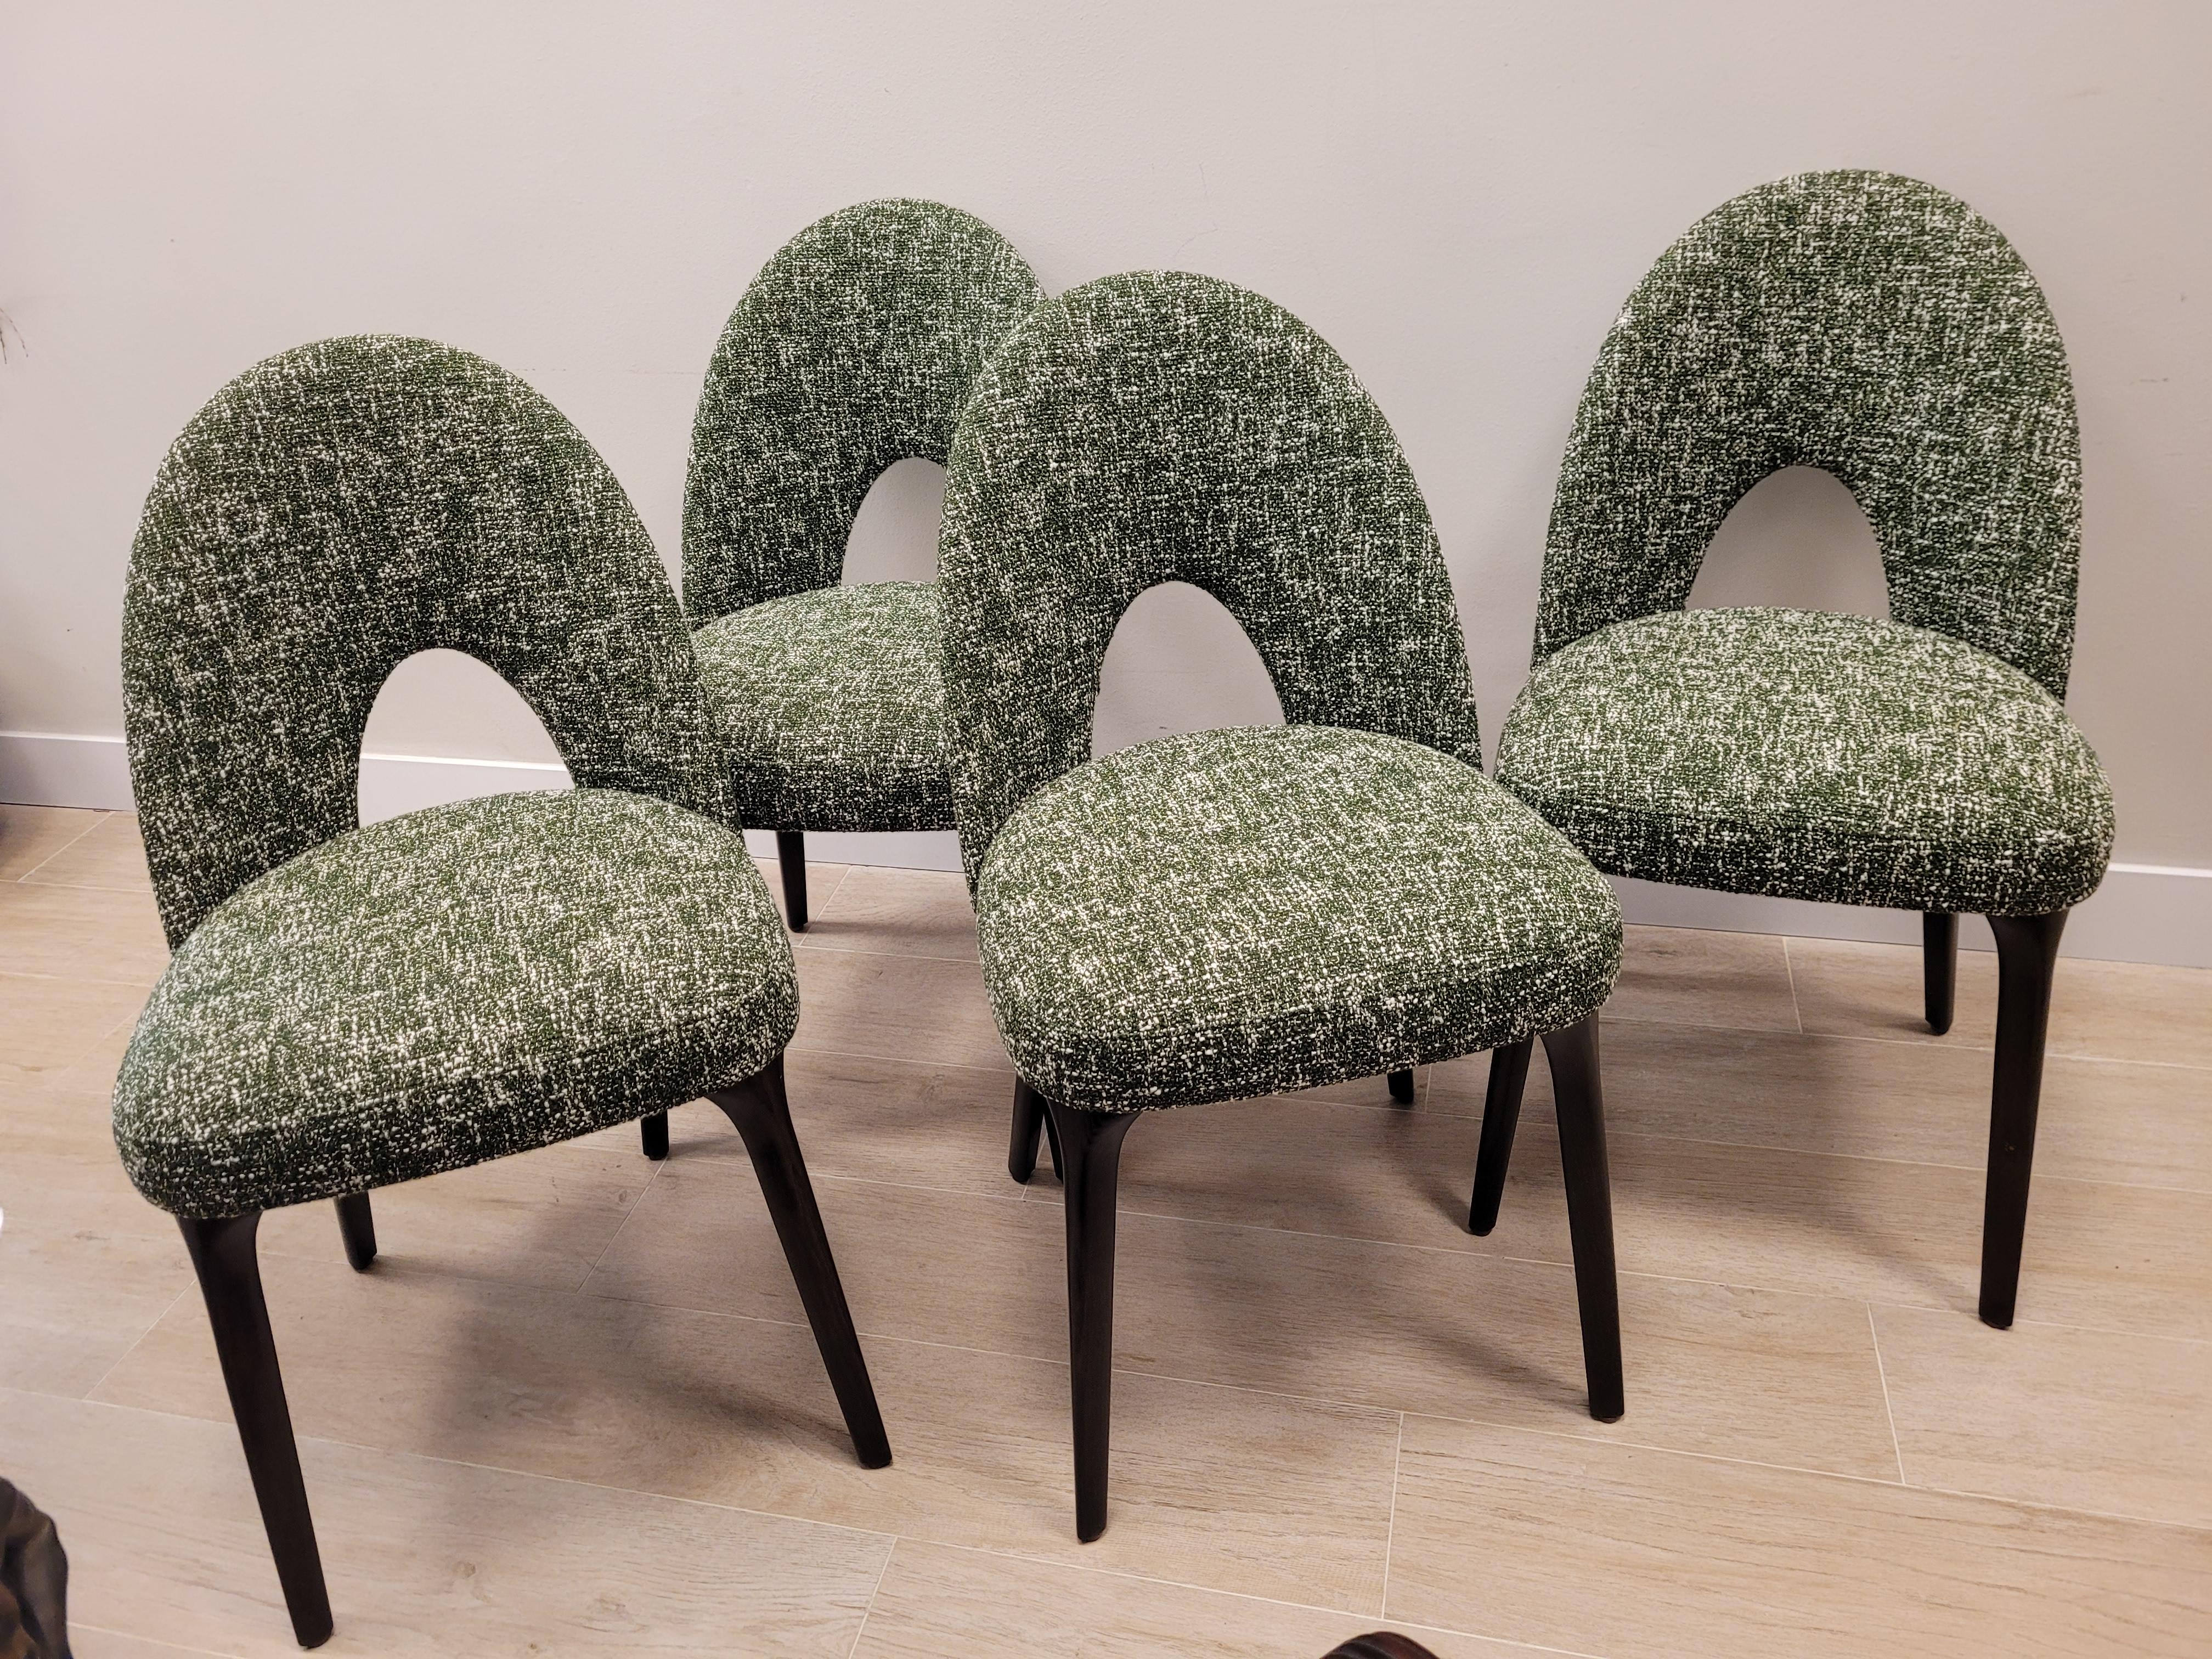 Gorgeous Set of four Flynn chairs by Roche Bobois. The structure is made of solid beech wood. Its original open and curved backrest makes it a very comfortable chair, which is perfect for placing in a dining room or living room.

All of them are